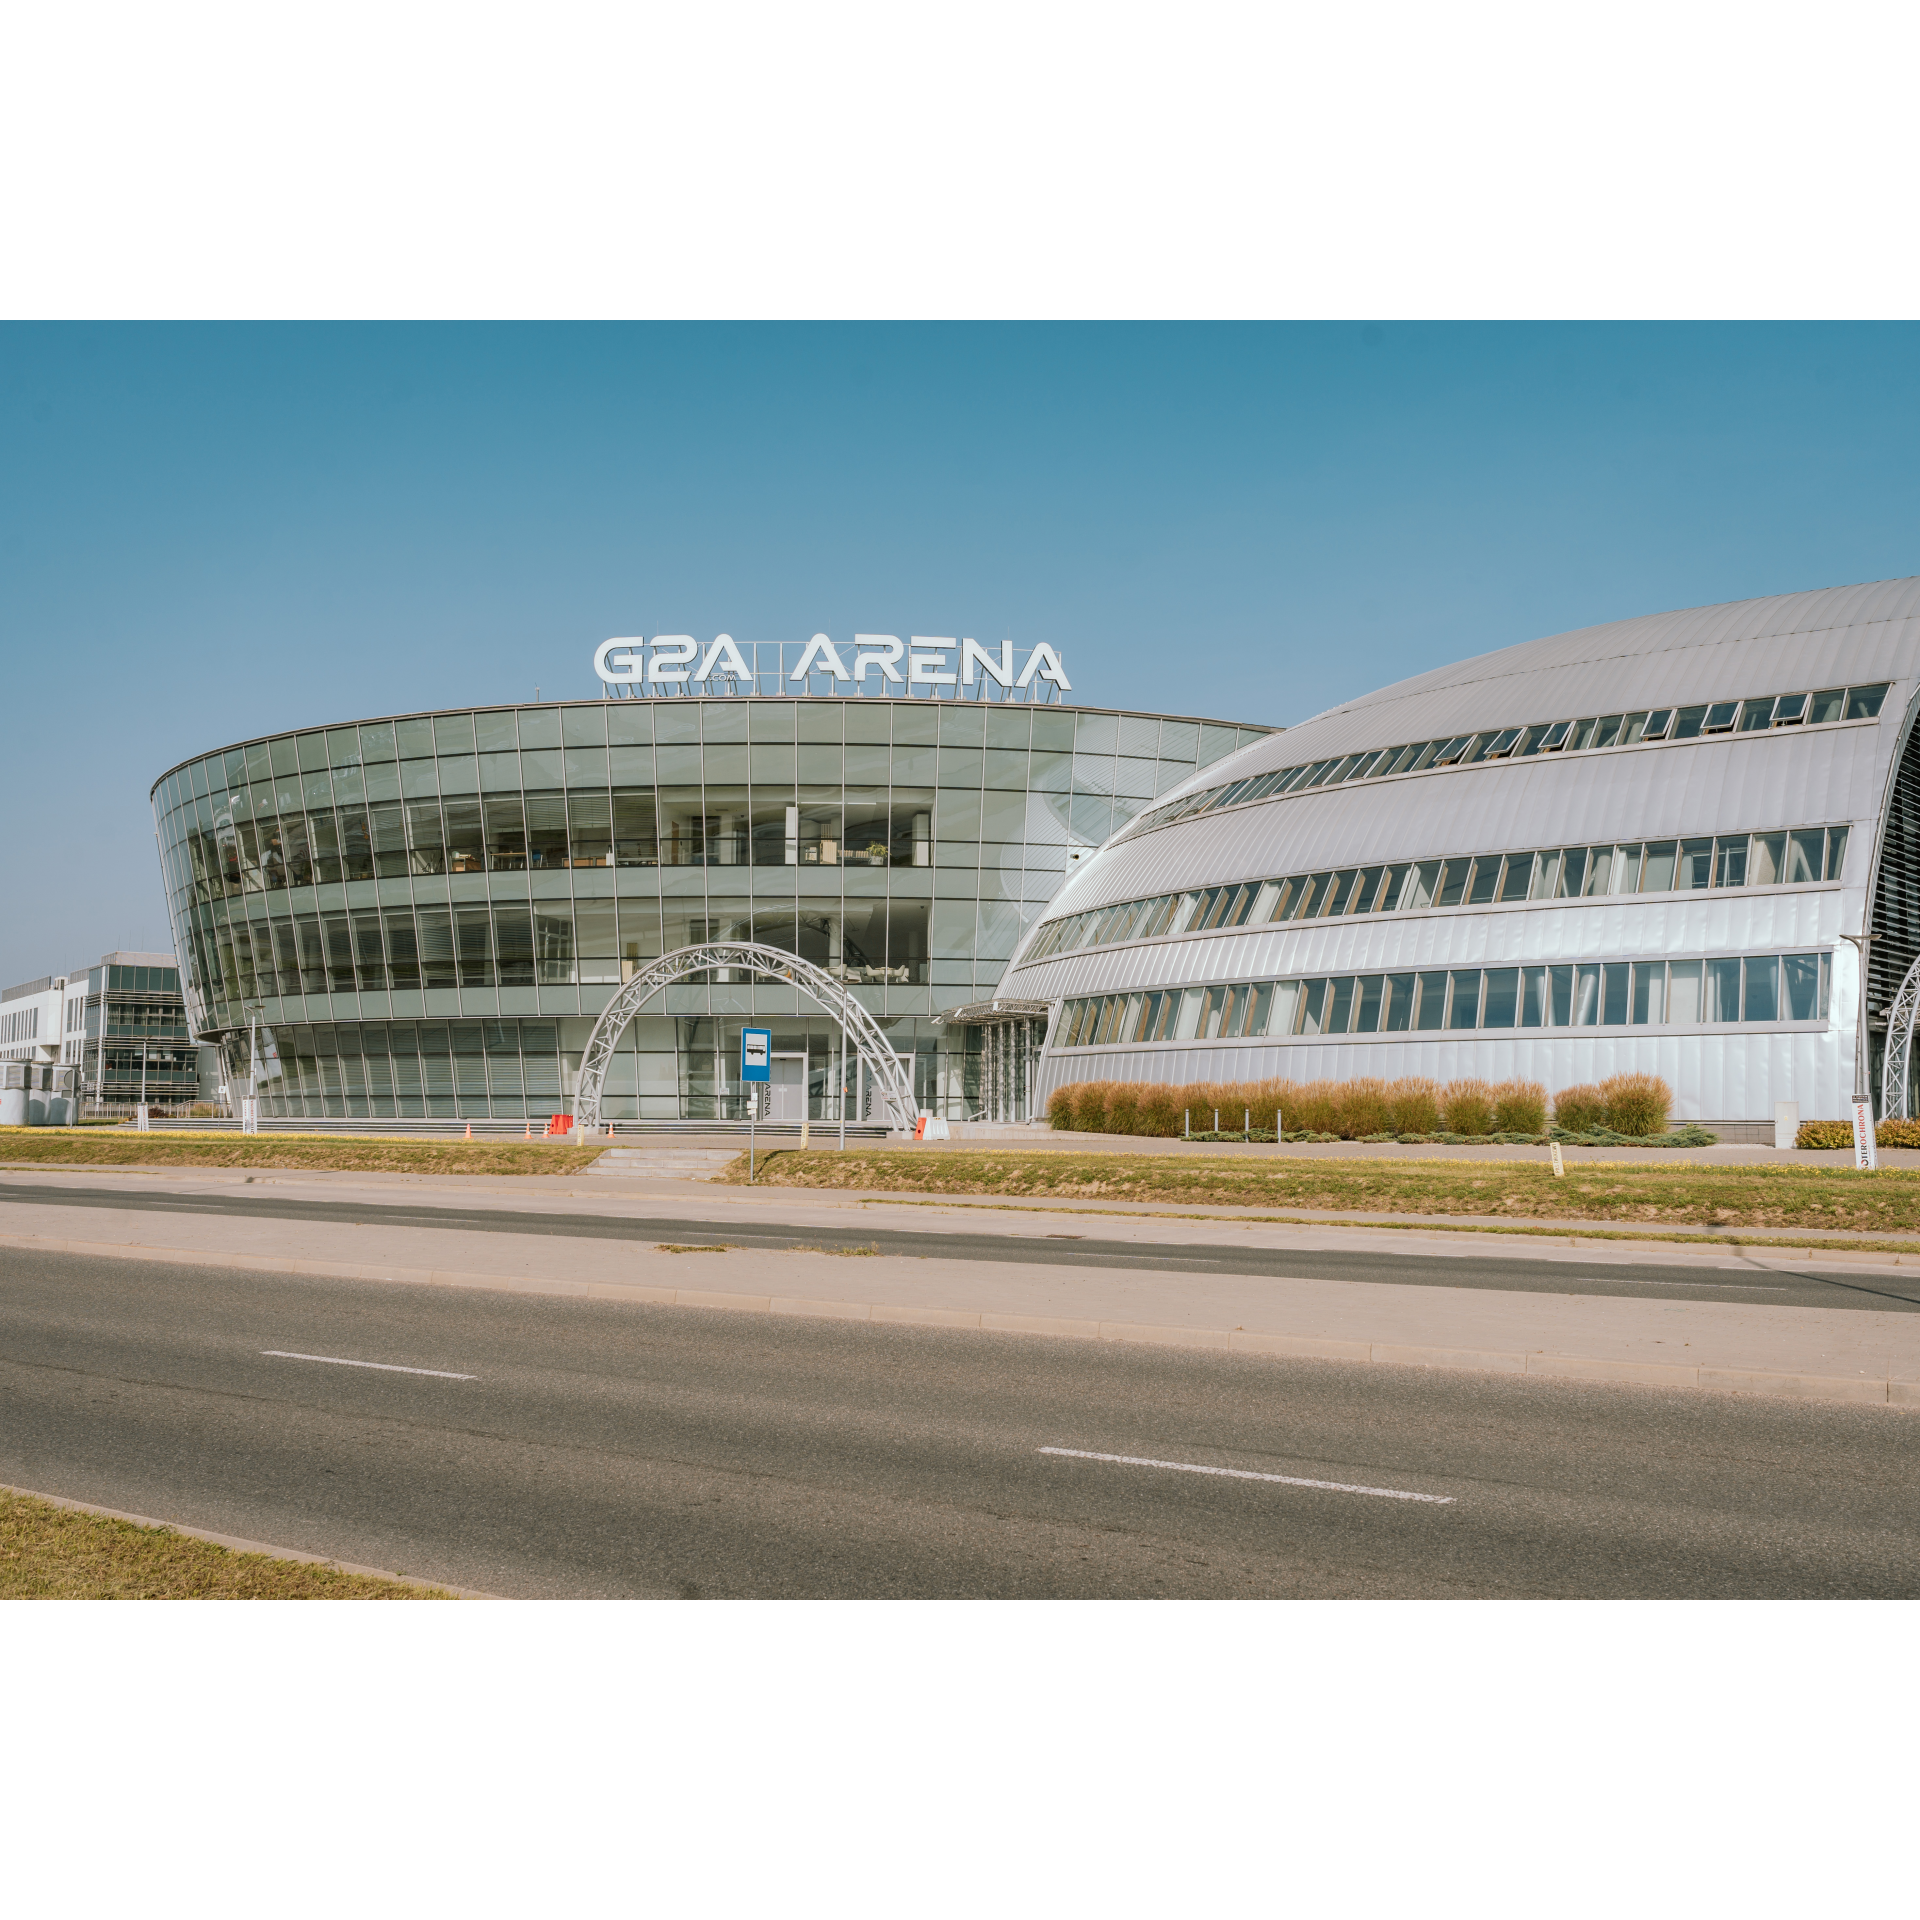 G2A Arena from the front